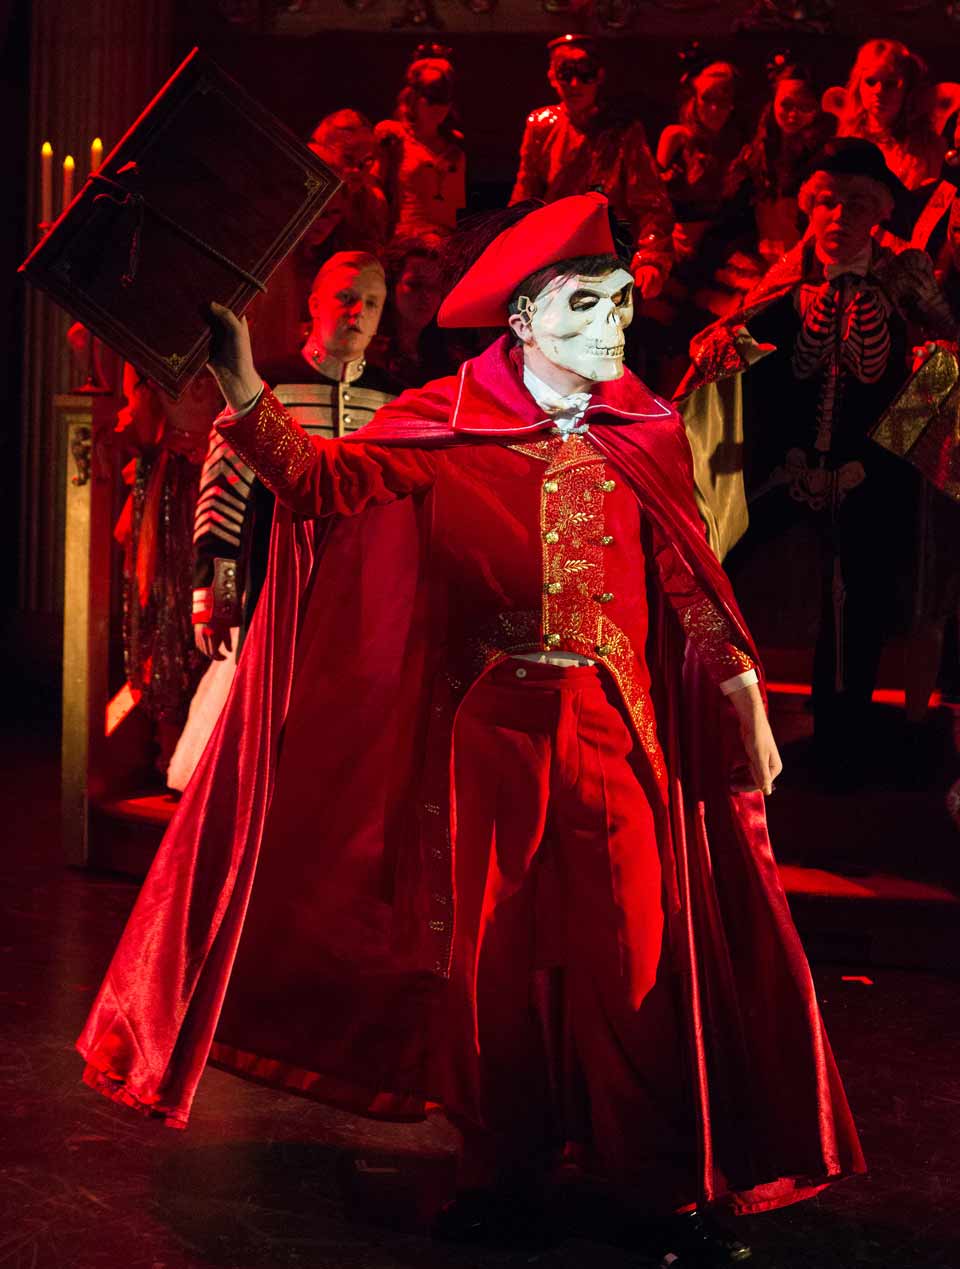 Red Death costume as worn by the Phantom in Phantom of the Opera.